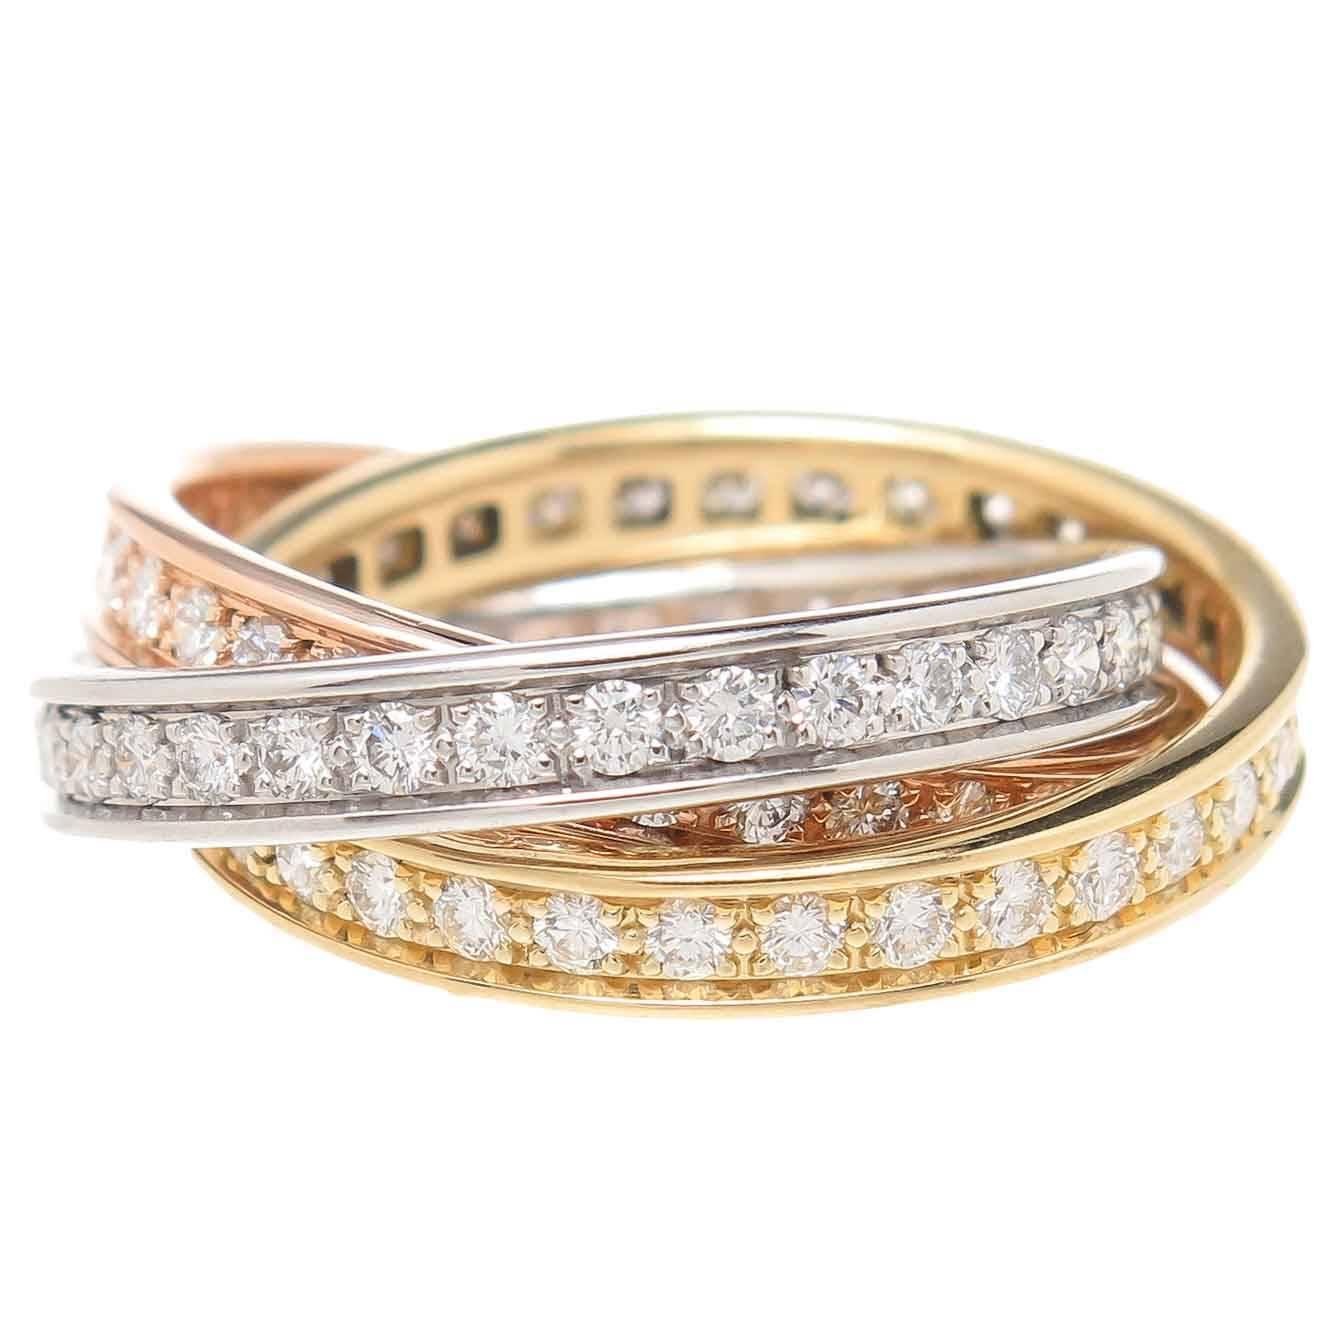 Cartier Trinity Tricolor Diamond Gold Ring For Sale at 1stdibs